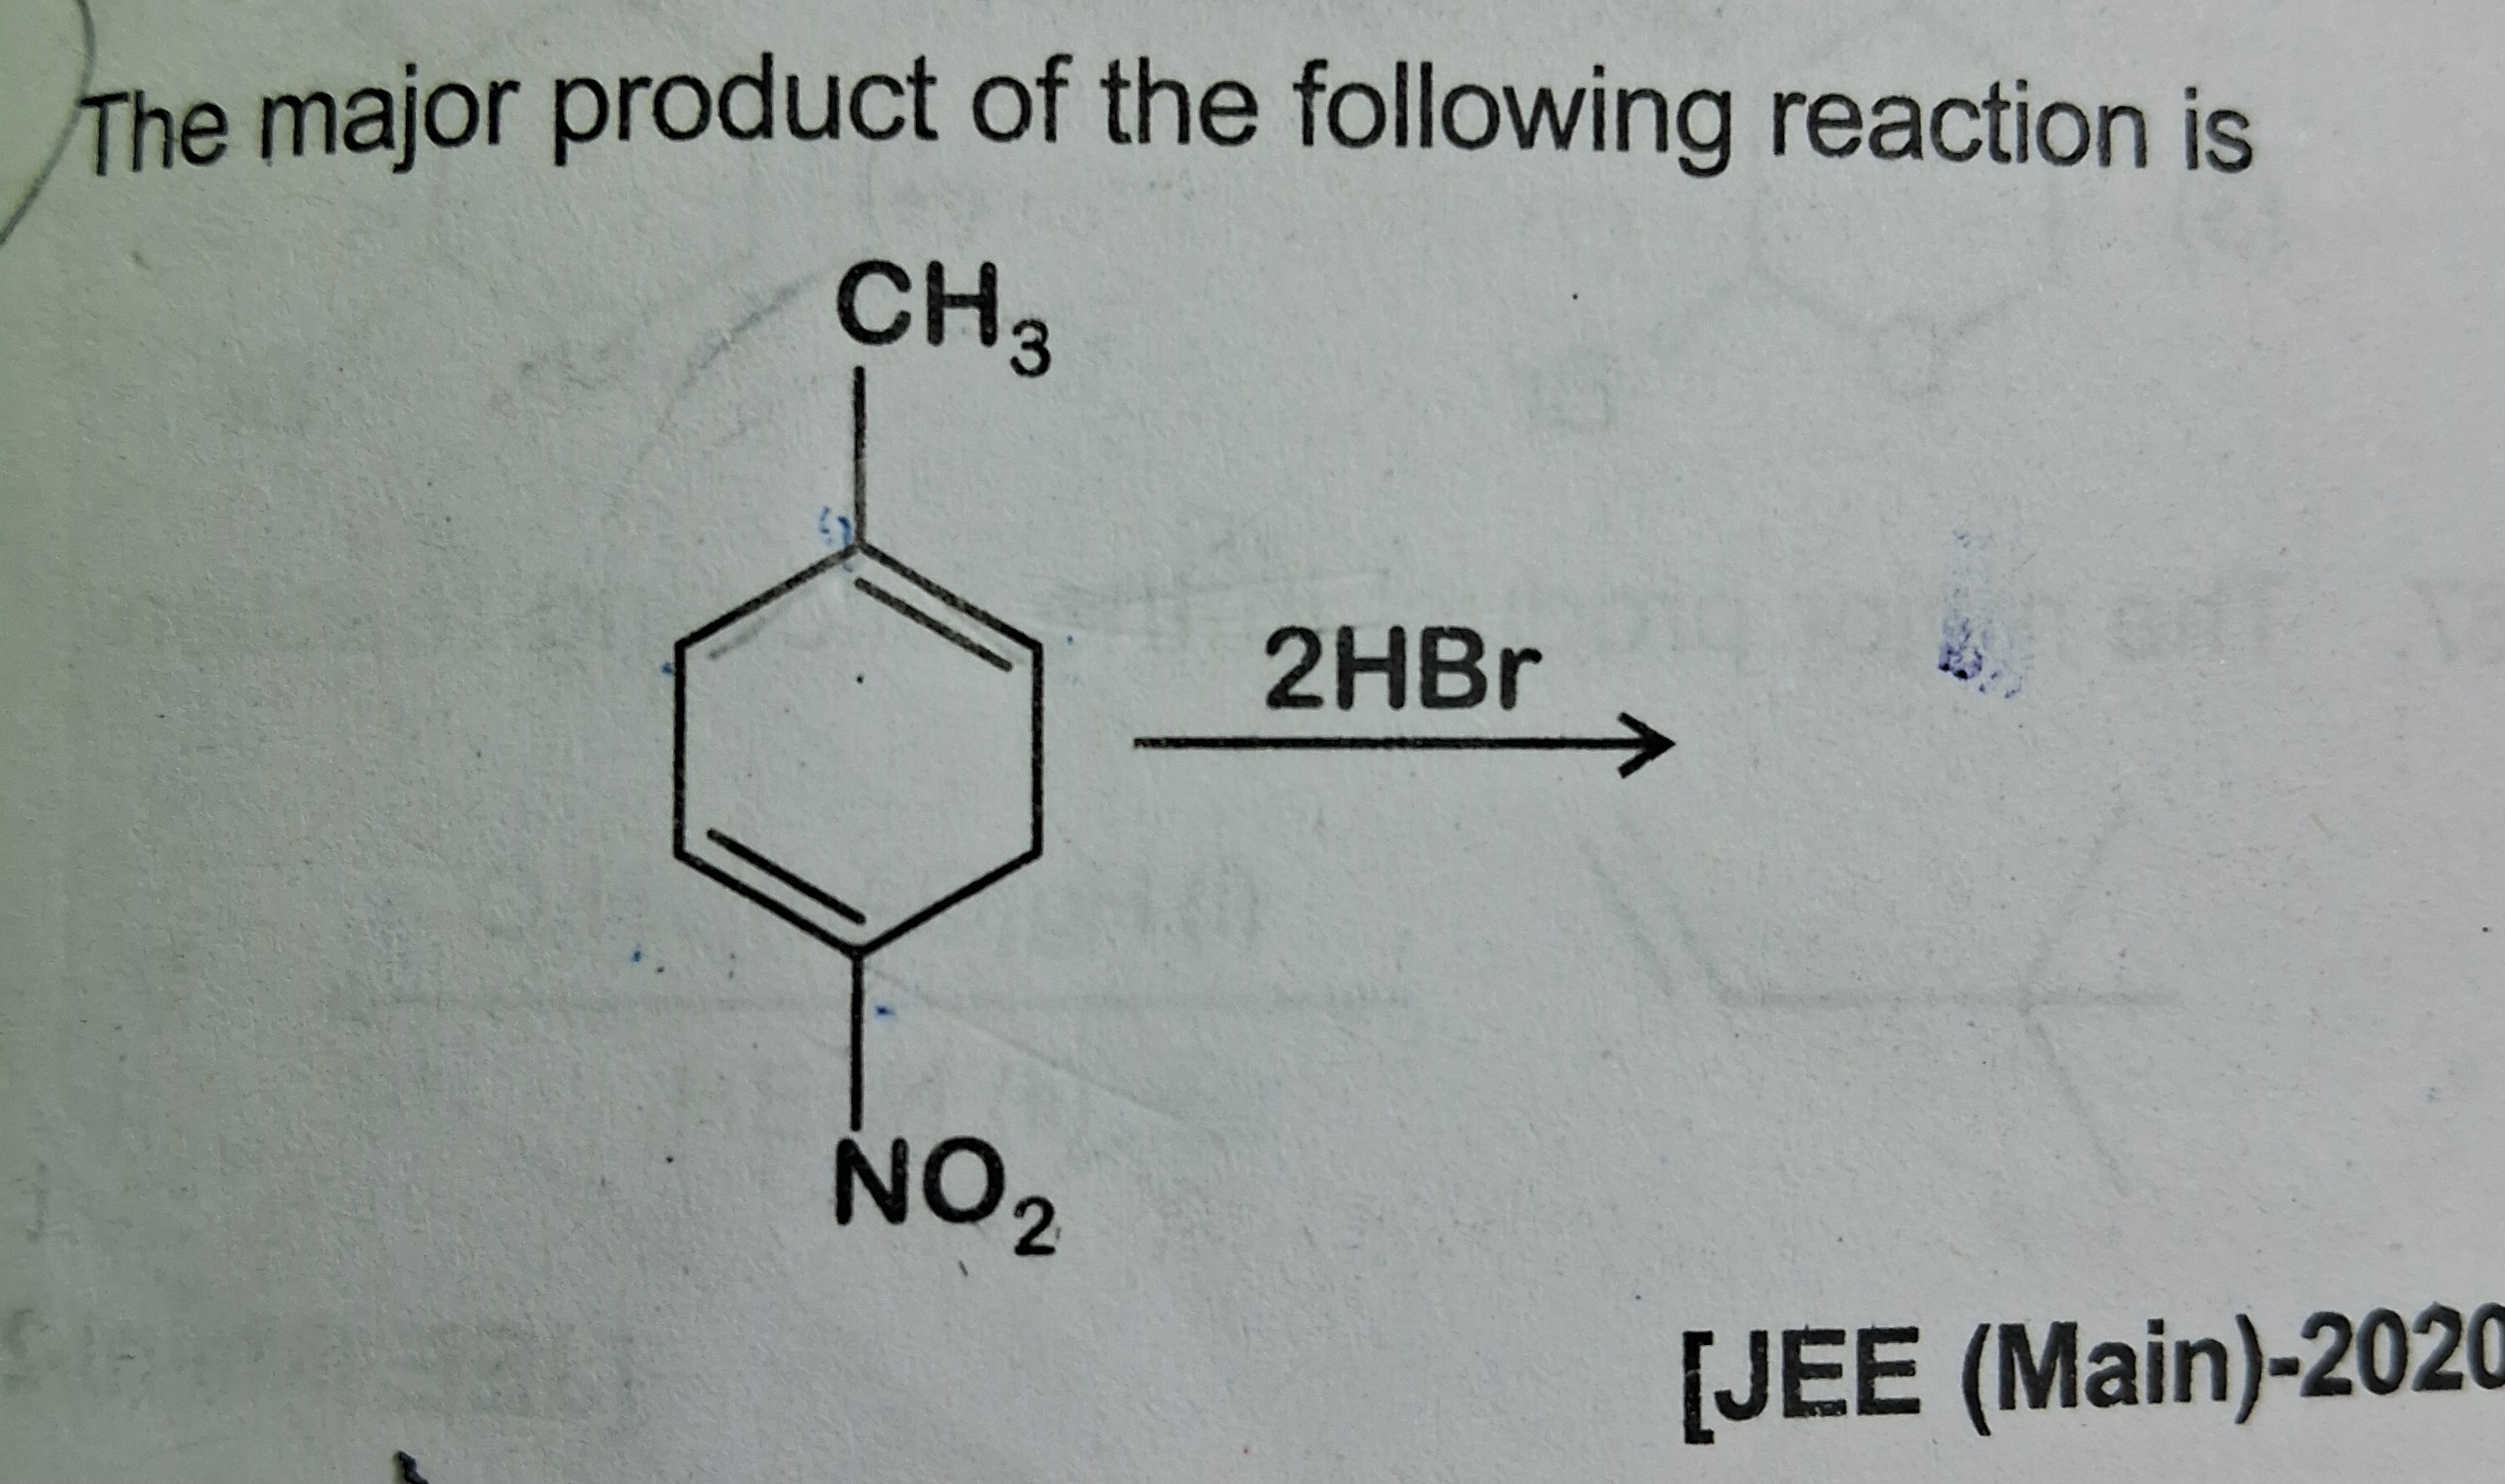 The major product of the following reaction is
CC1=CCC([N+](=O)[O-])=C